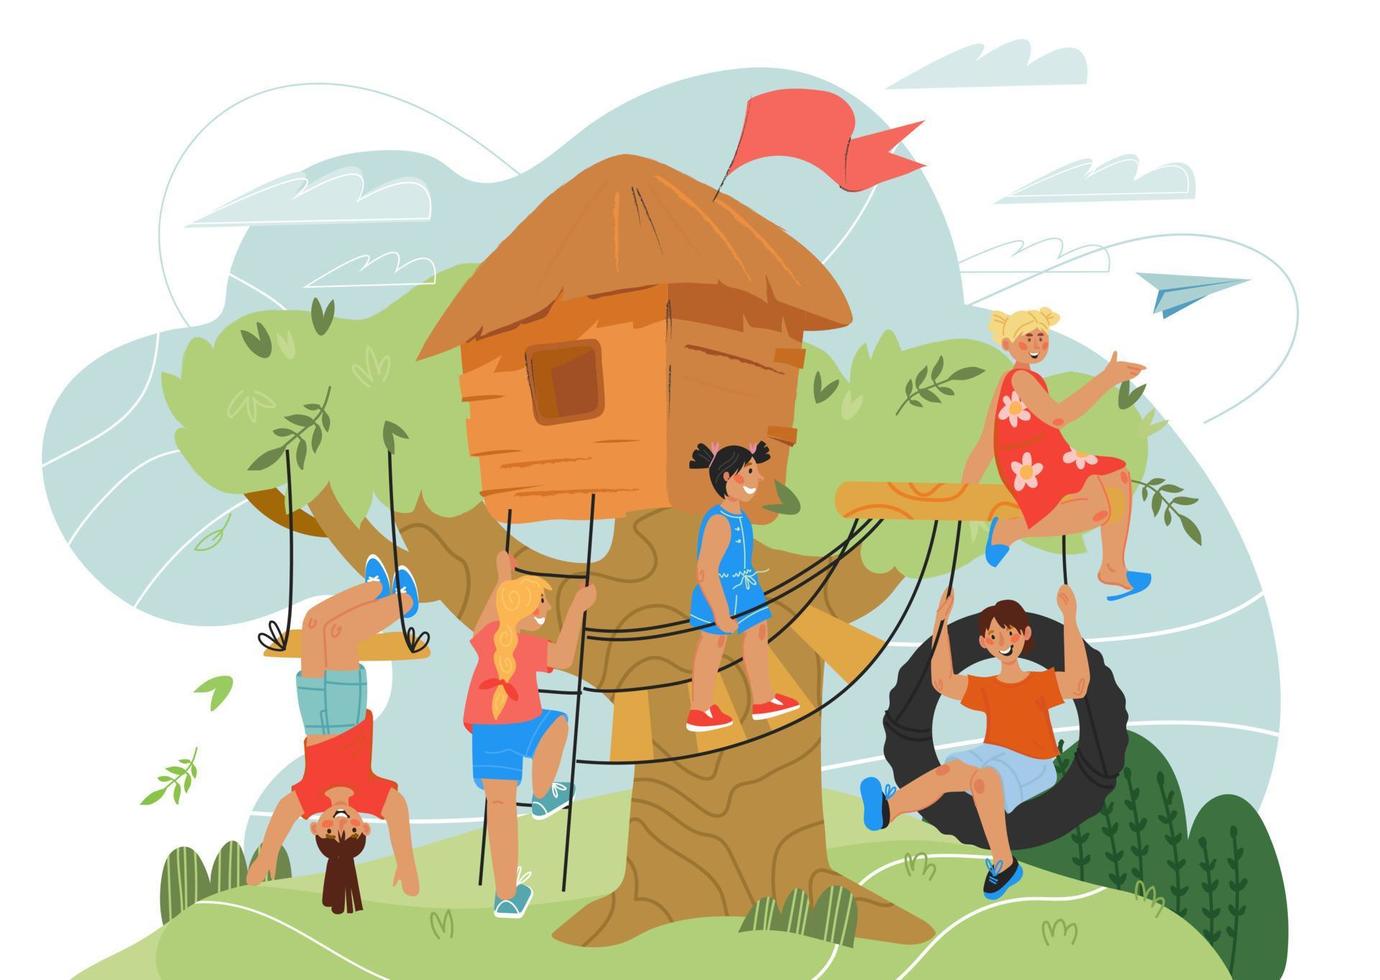 Children playing on playground with tree house. Summer landscape with kids game hut or toy home in forest. Fun and amusement near playhouse. Flat cartoon vector illustration.